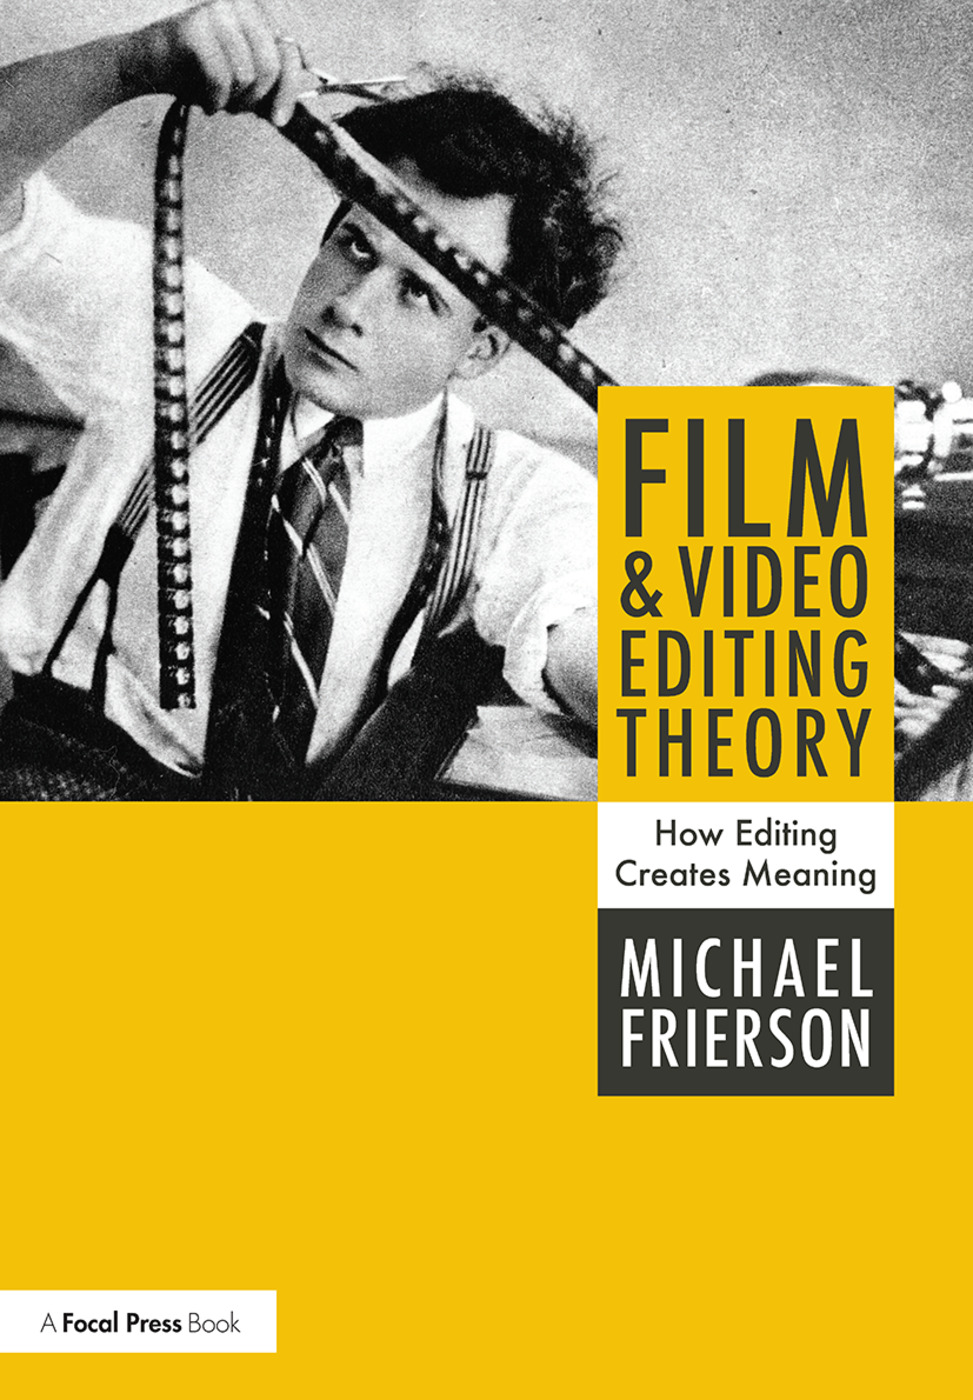 Film and Video Editing Theory: How Editing Creates Meaning book cover